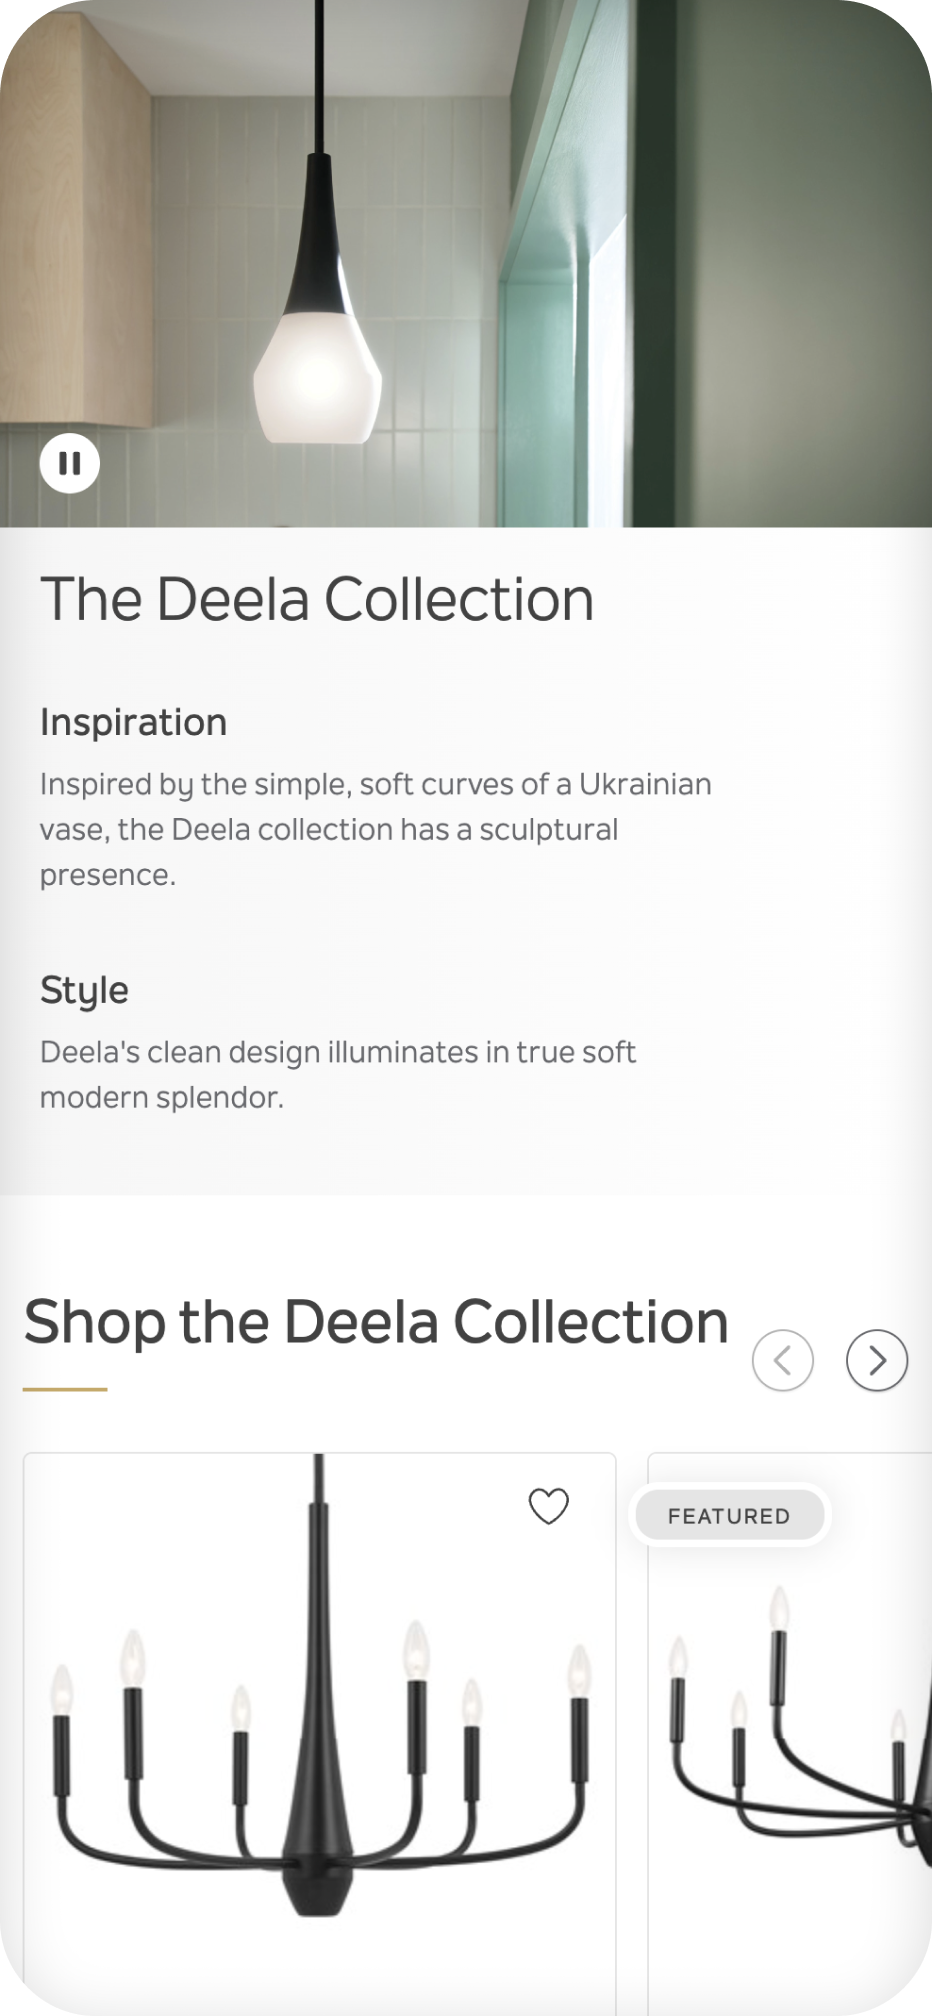 Section of product detail outlining the style and inspiration of "The Deela Collection"